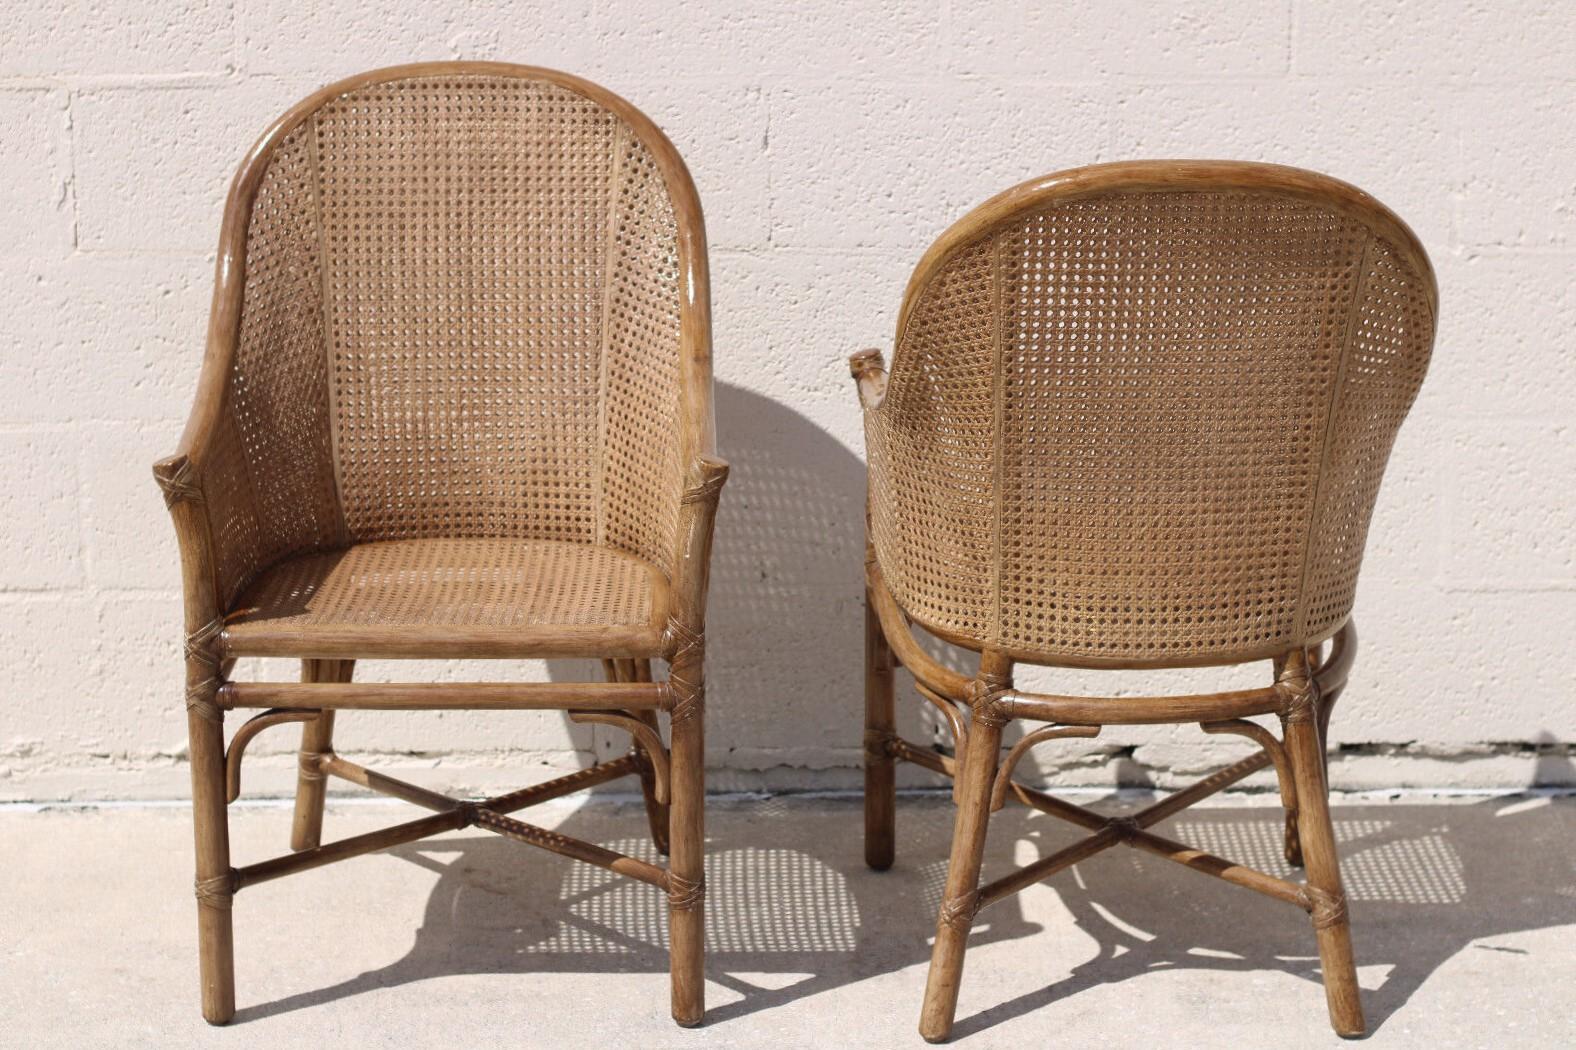 Leather Elinor McGuire Rattan Caned Barrel Back Arm Chairs, a Pair For Sale